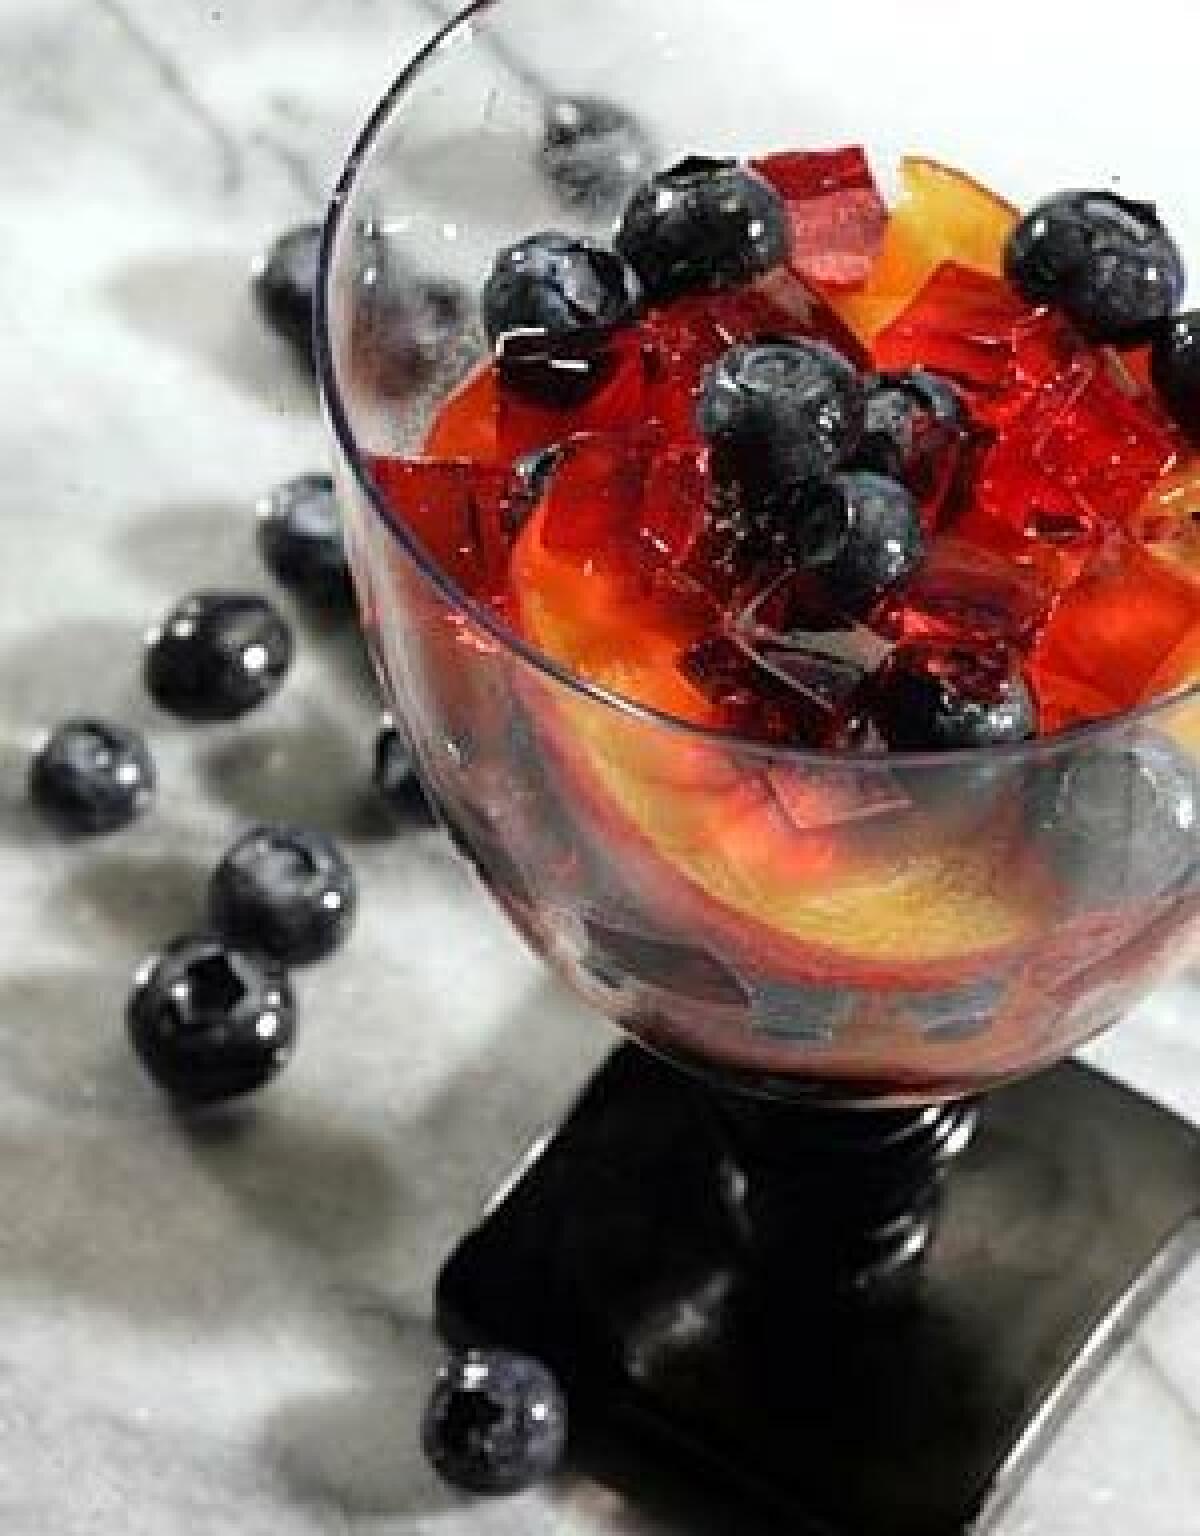 COOL AND SOPHISTICATED: Cubes of rose-flavored jelly layered with nectarines and blueberries create the taste of summer in a glass.